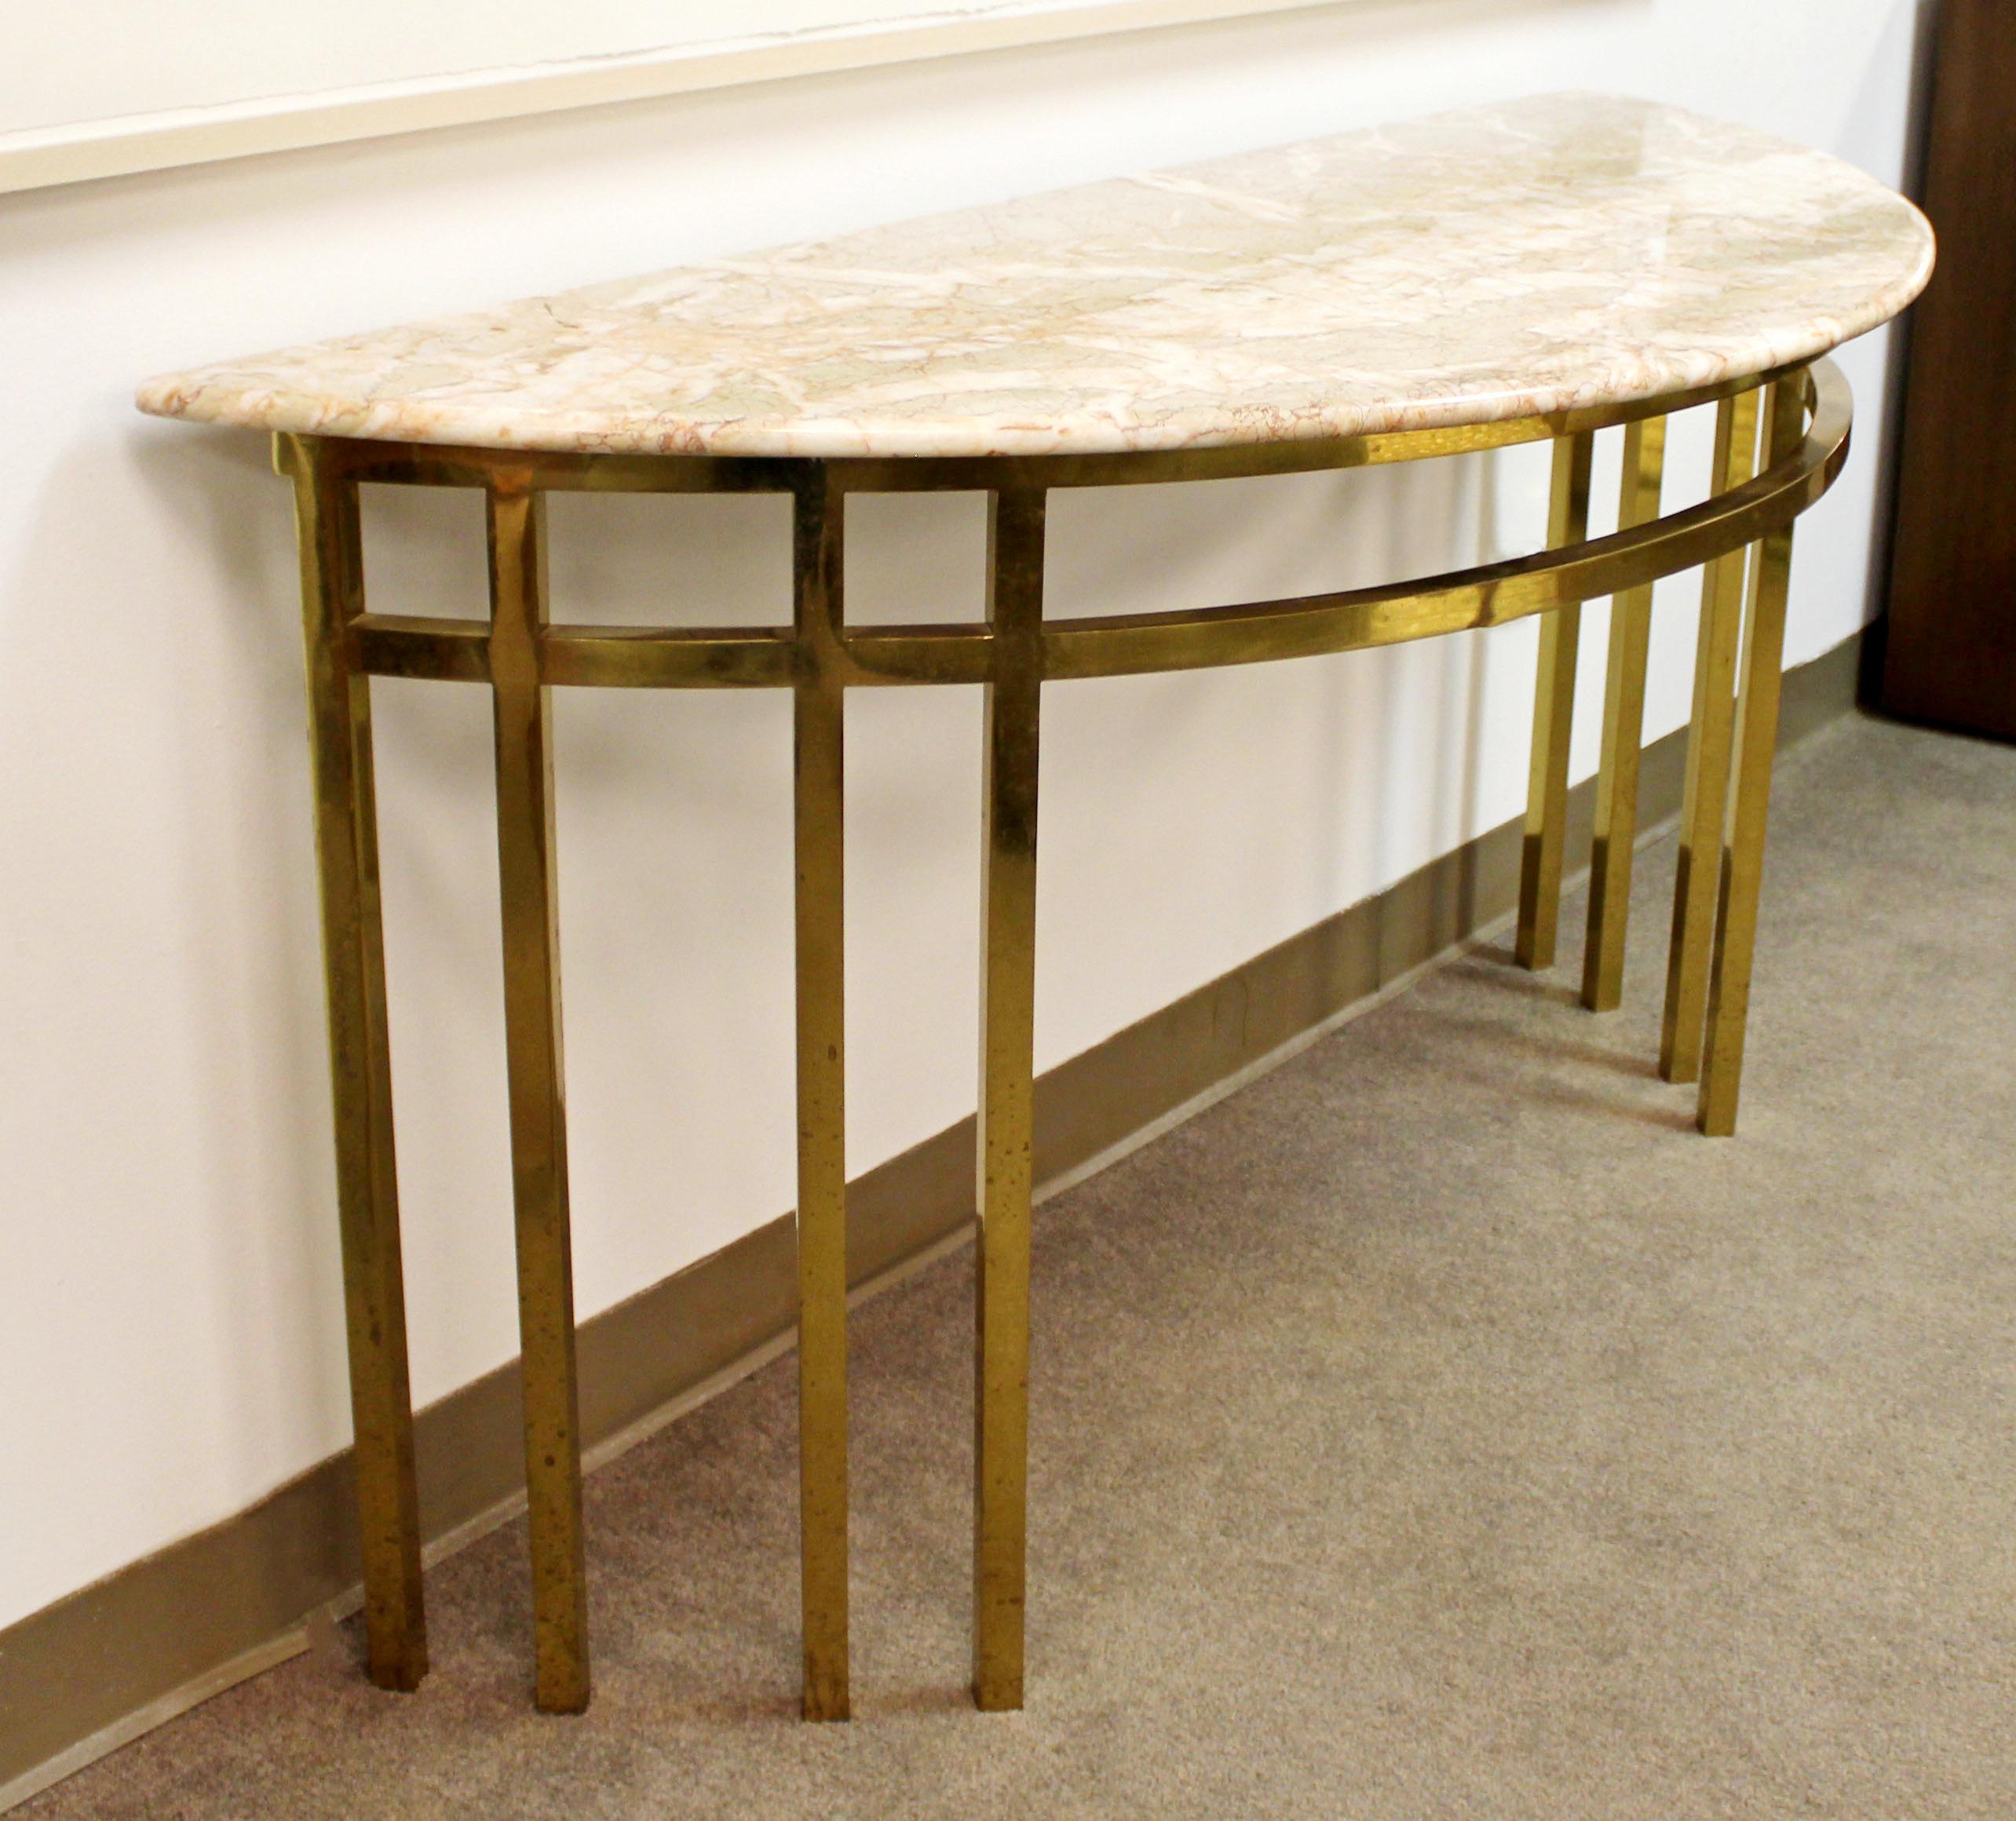 American Mid-Century Modern Marble on Brass Demilune Console Table Parzinger Style, 1960s